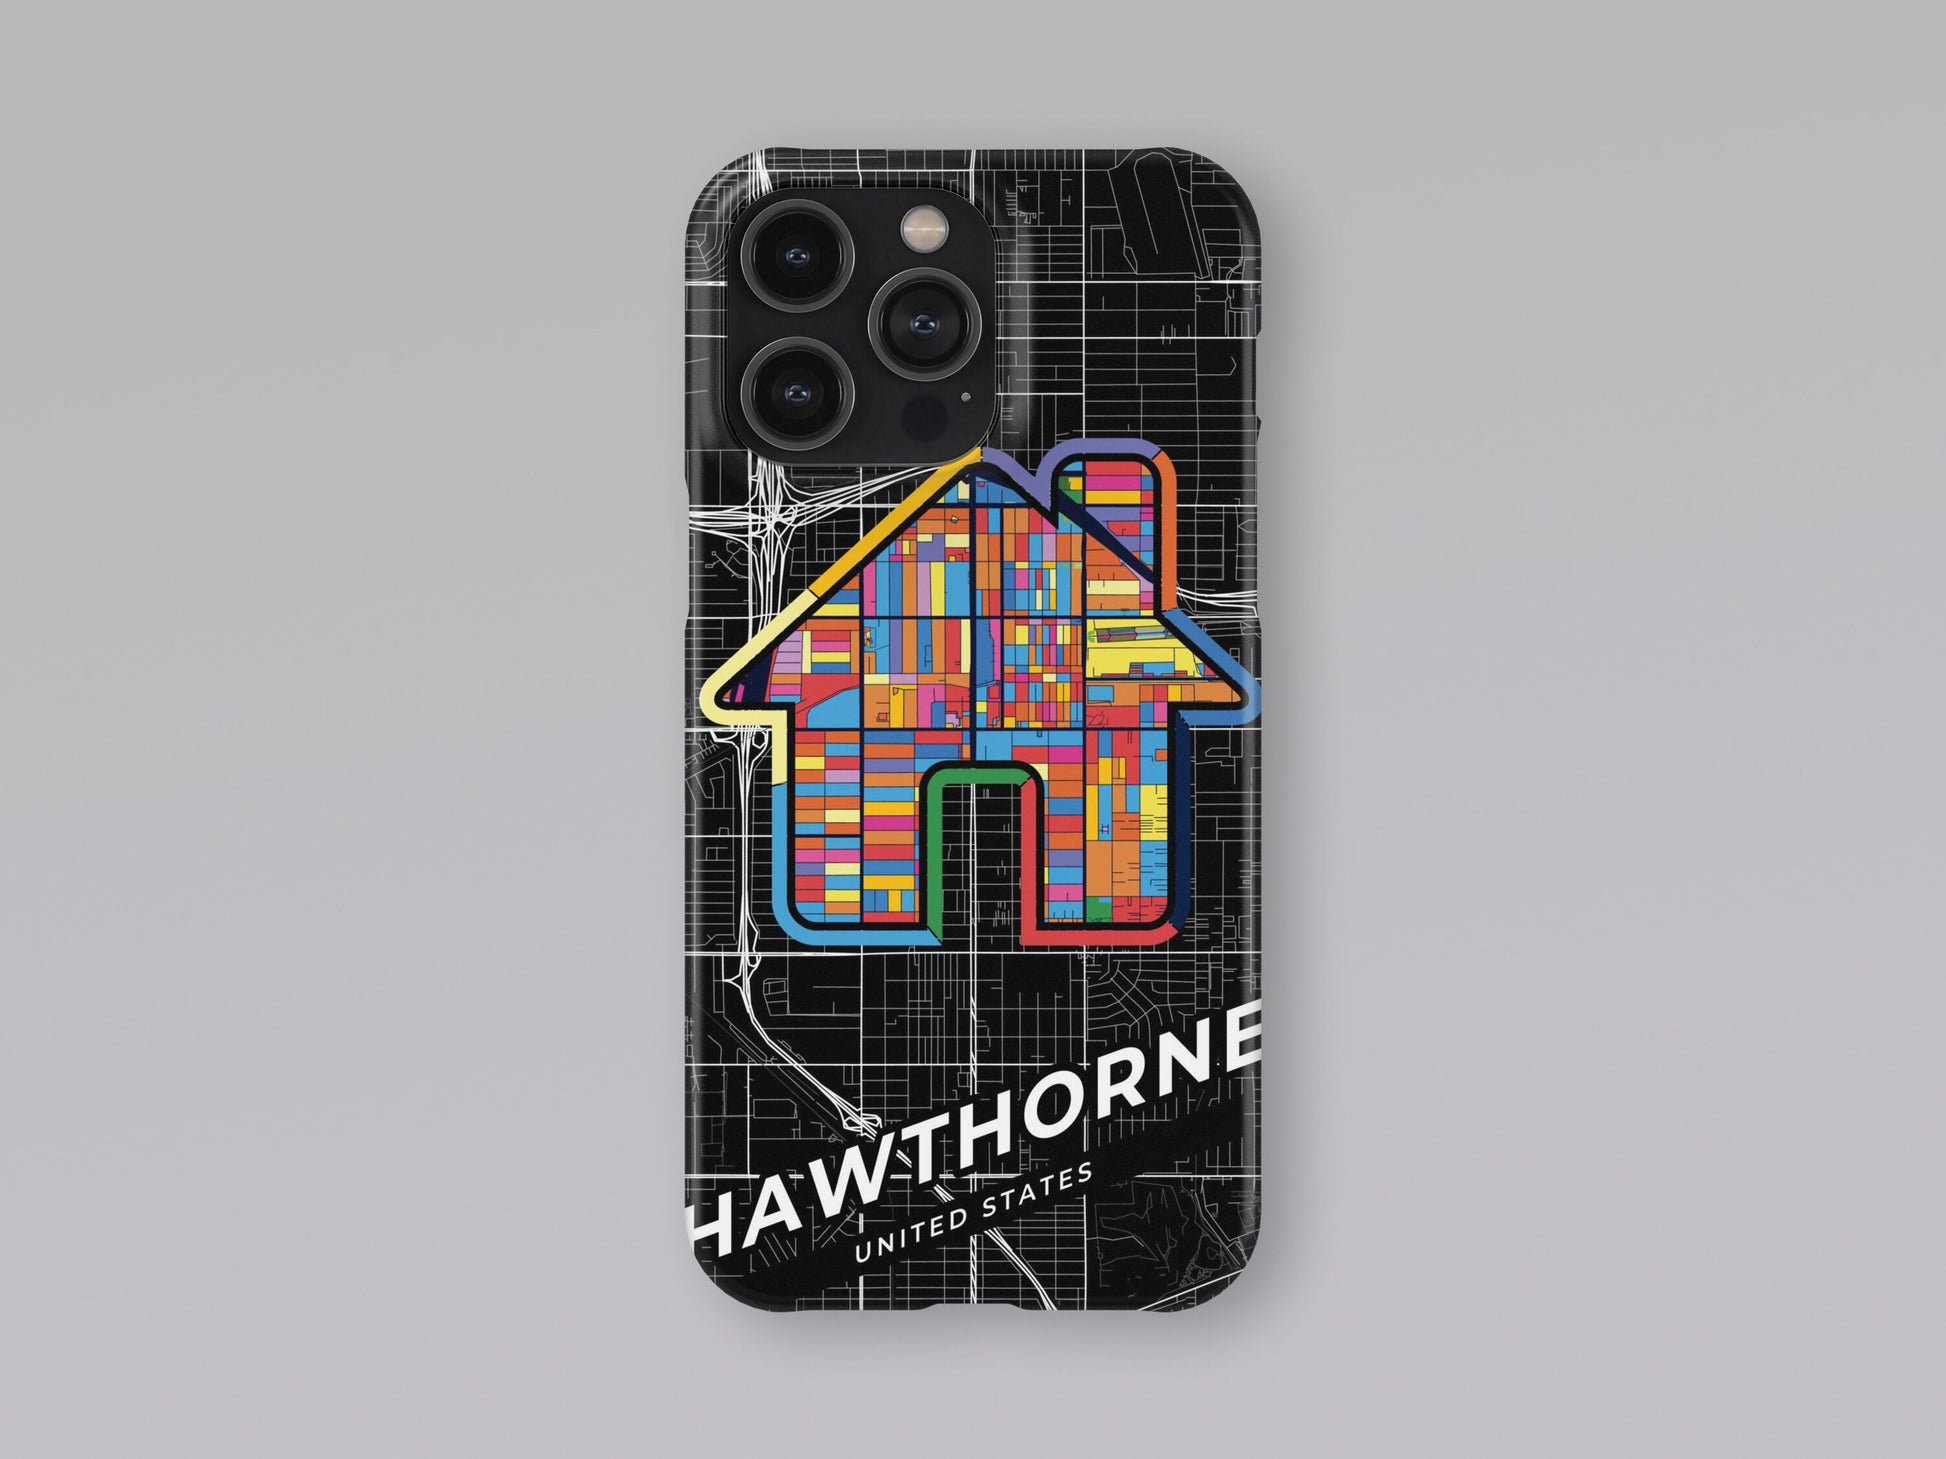 Hawthorne California slim phone case with colorful icon. Birthday, wedding or housewarming gift. Couple match cases. 3